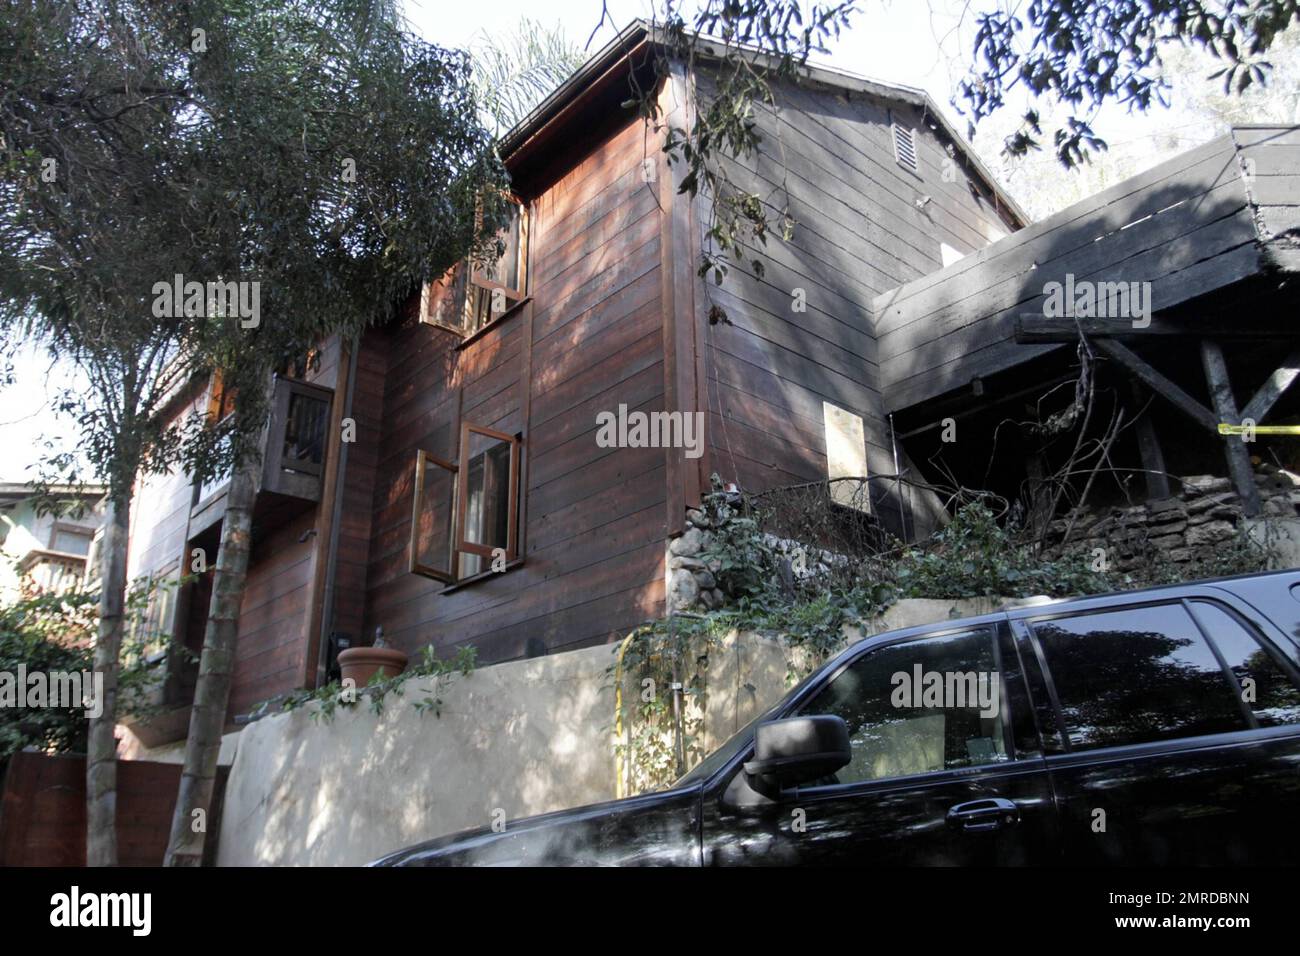 General views of rock legend Jim Morrison's former home after it was damaged by fire. The 1922 Hollywood home reportedly caught fire at 1:20 a.m. after flames spread from a nearby car. The blaze took 35 minutes to contain and was battled by 56 firefighters. According to the reports, the fire was one of 19 overnight arson attacks that plagued Hollywood and West Hollywood early Friday morning. The home was where Morrison wrote The Doors' album 'Waiting for the Sun' and portions of 'The Soft Parade.' The street on which it is located was the insporation for the song 'Love Street,' which was featu Stock Photo